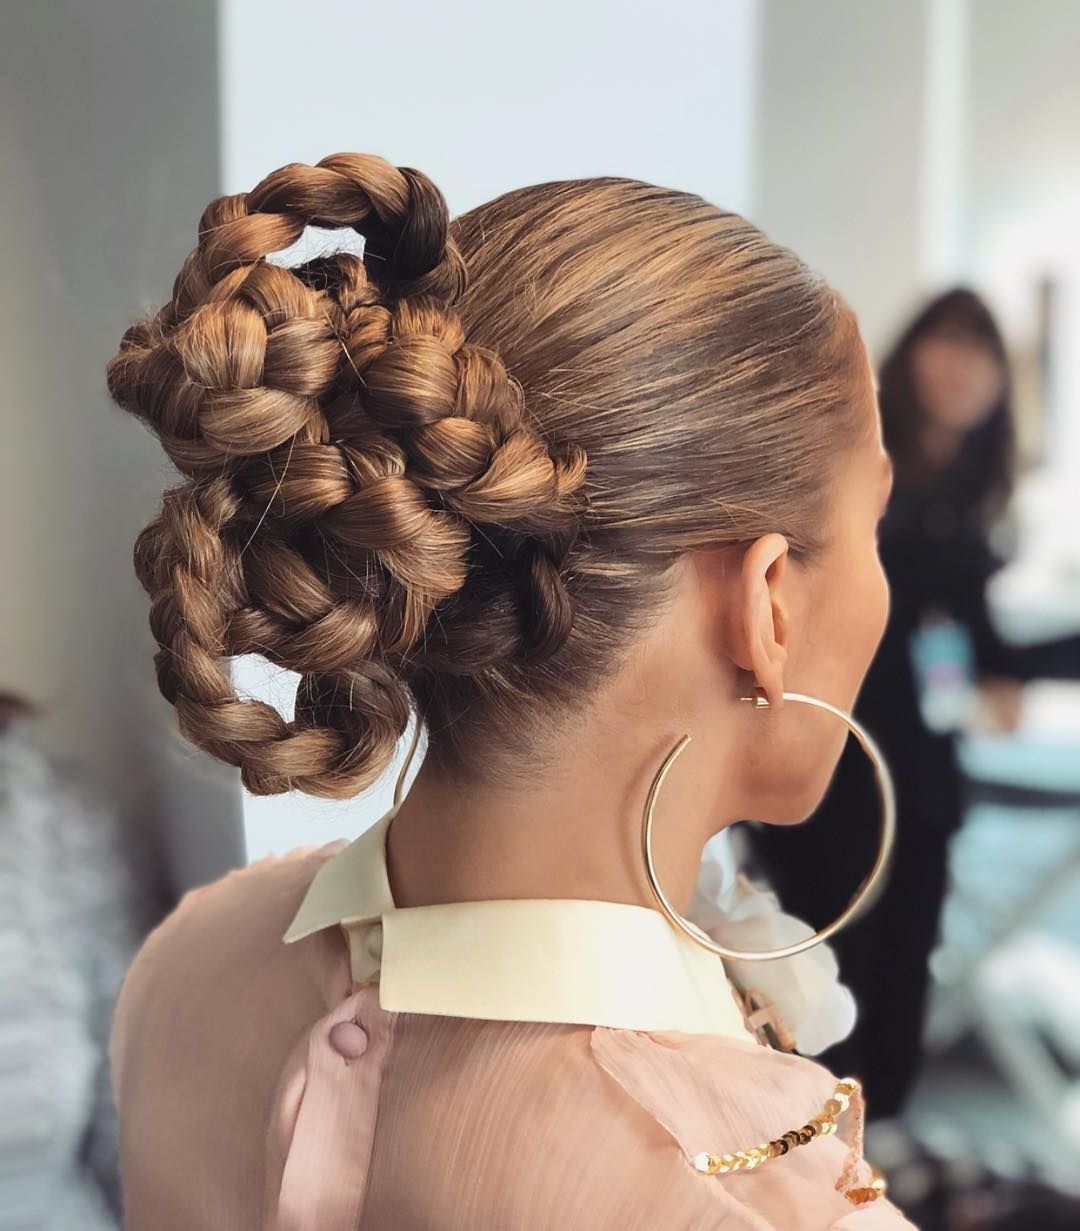 20 Braided Updo Hairstyles – Pictures Of Pretty Updos With Braids Throughout Most Popular Braided Updo For Long Hair (Gallery 11 of 15)